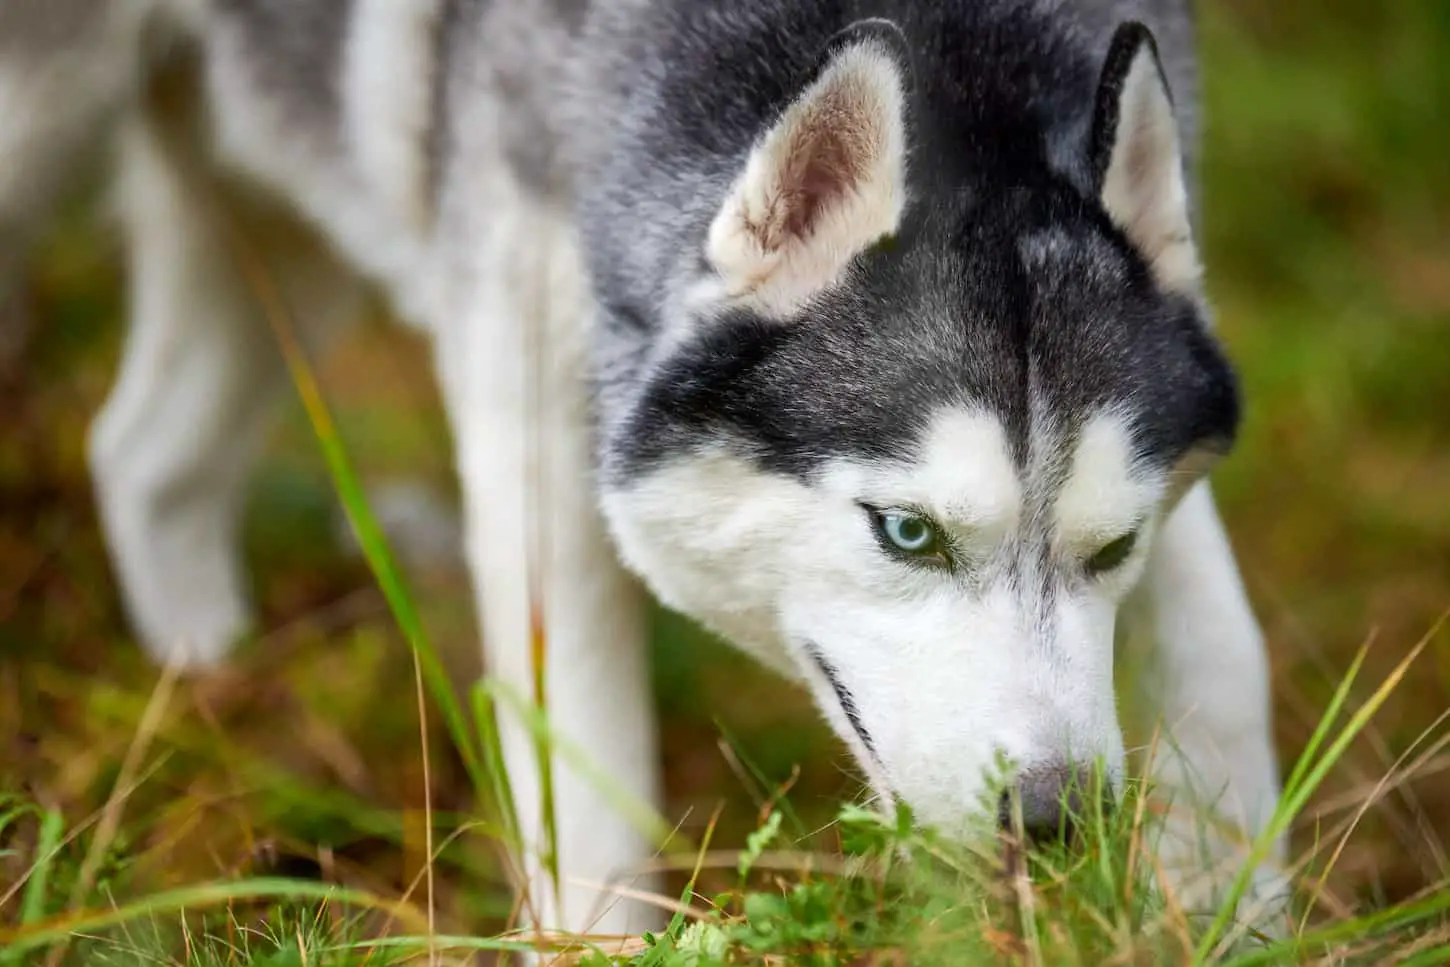 An image of a Siberian Husky dog digging the ground and sniffing, a curious Husky dog digging a hole in garden grass.